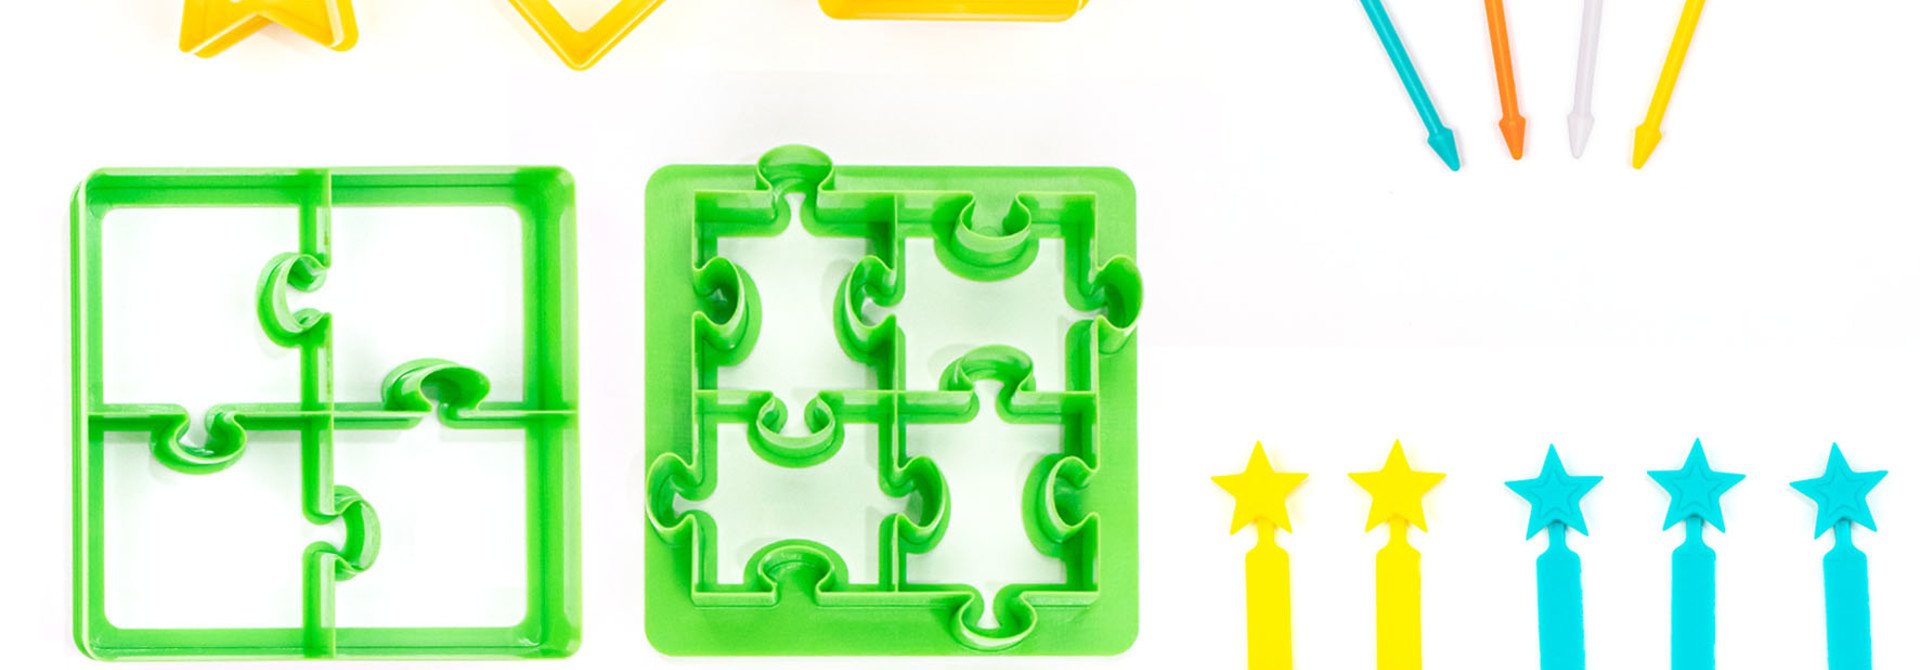 Lunch Punch Cutter & Bento Set- Dino - Puzzle